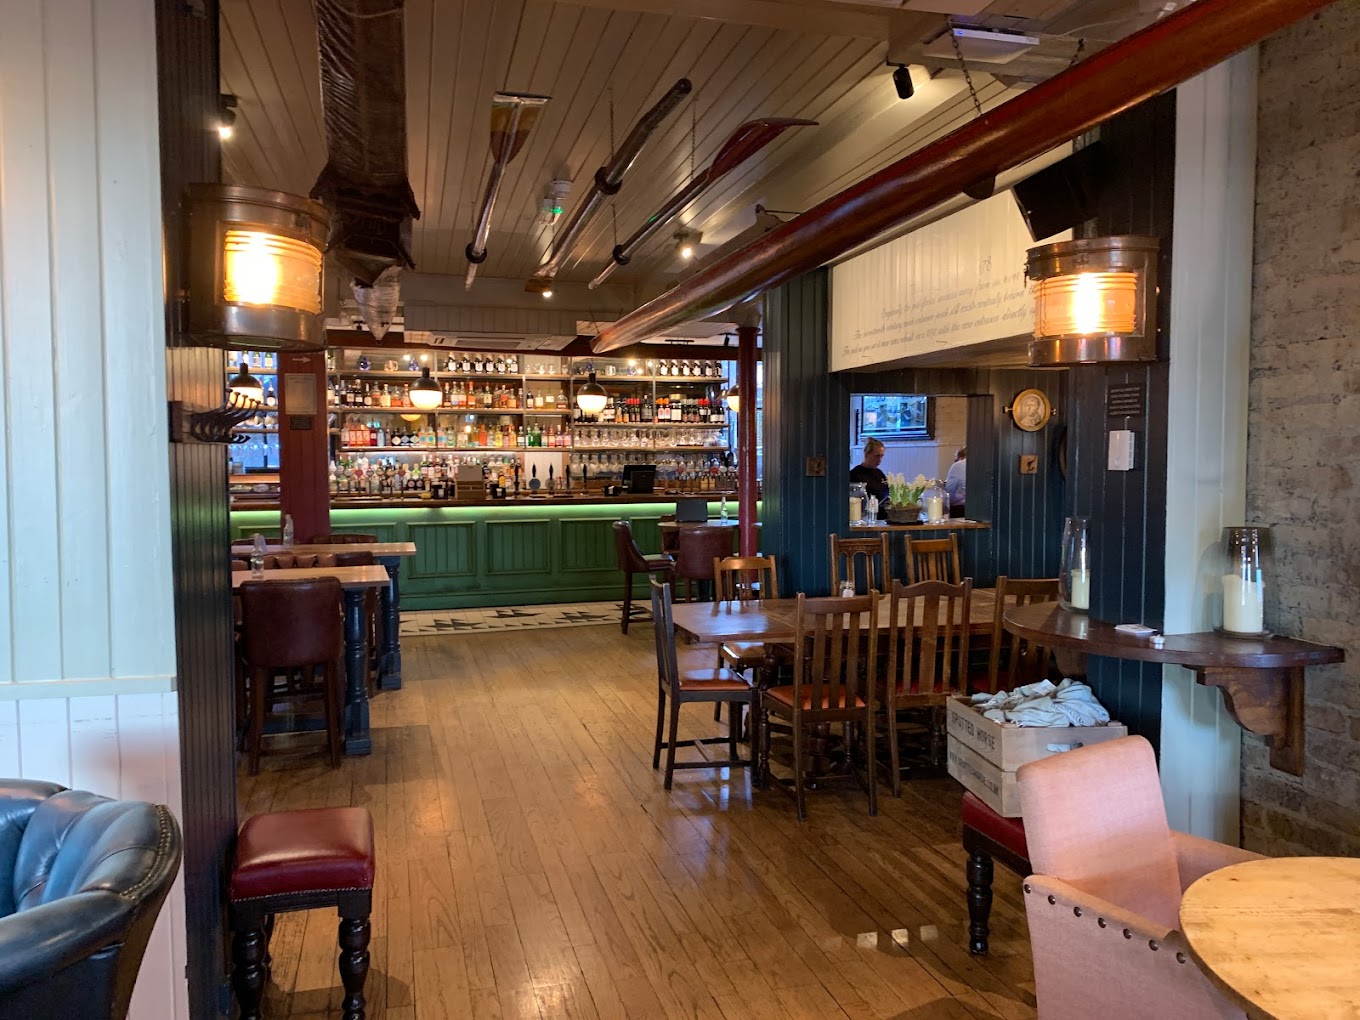 Discover the top pubs in Hammersmith with our comprehensive guide. From cozy traditional pubs to stylish gastropubs, we've curated the best spots to enjoy a pint or two. #Hammersmith #londonpubs Things To Do In London | Things To Do In Hammersmith | Best Pubs In Hammersmith | Best Pubs In London | Best Pub Food | Sunday Roast | Places To Eat In London #londonnightlife | Things To Do At Night